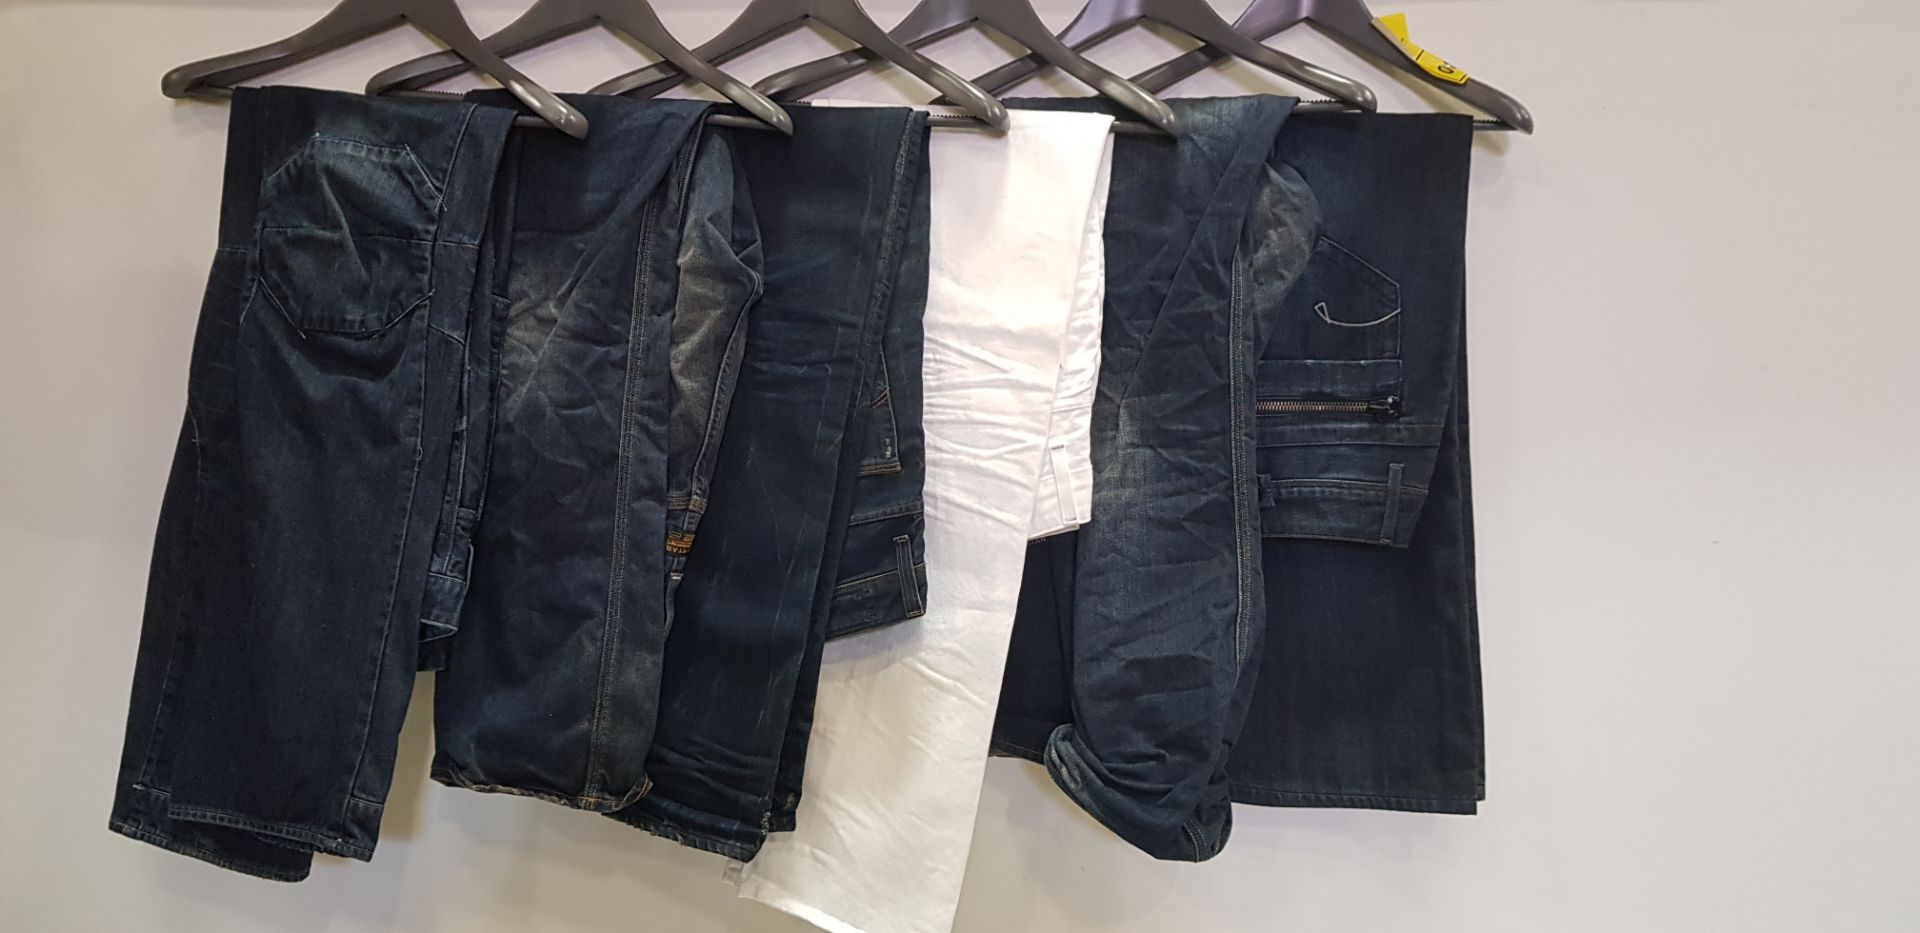 6 X BRAND NEW G-STAR RAW JEANS IN VARIOUS COLOURS (SIZE30)